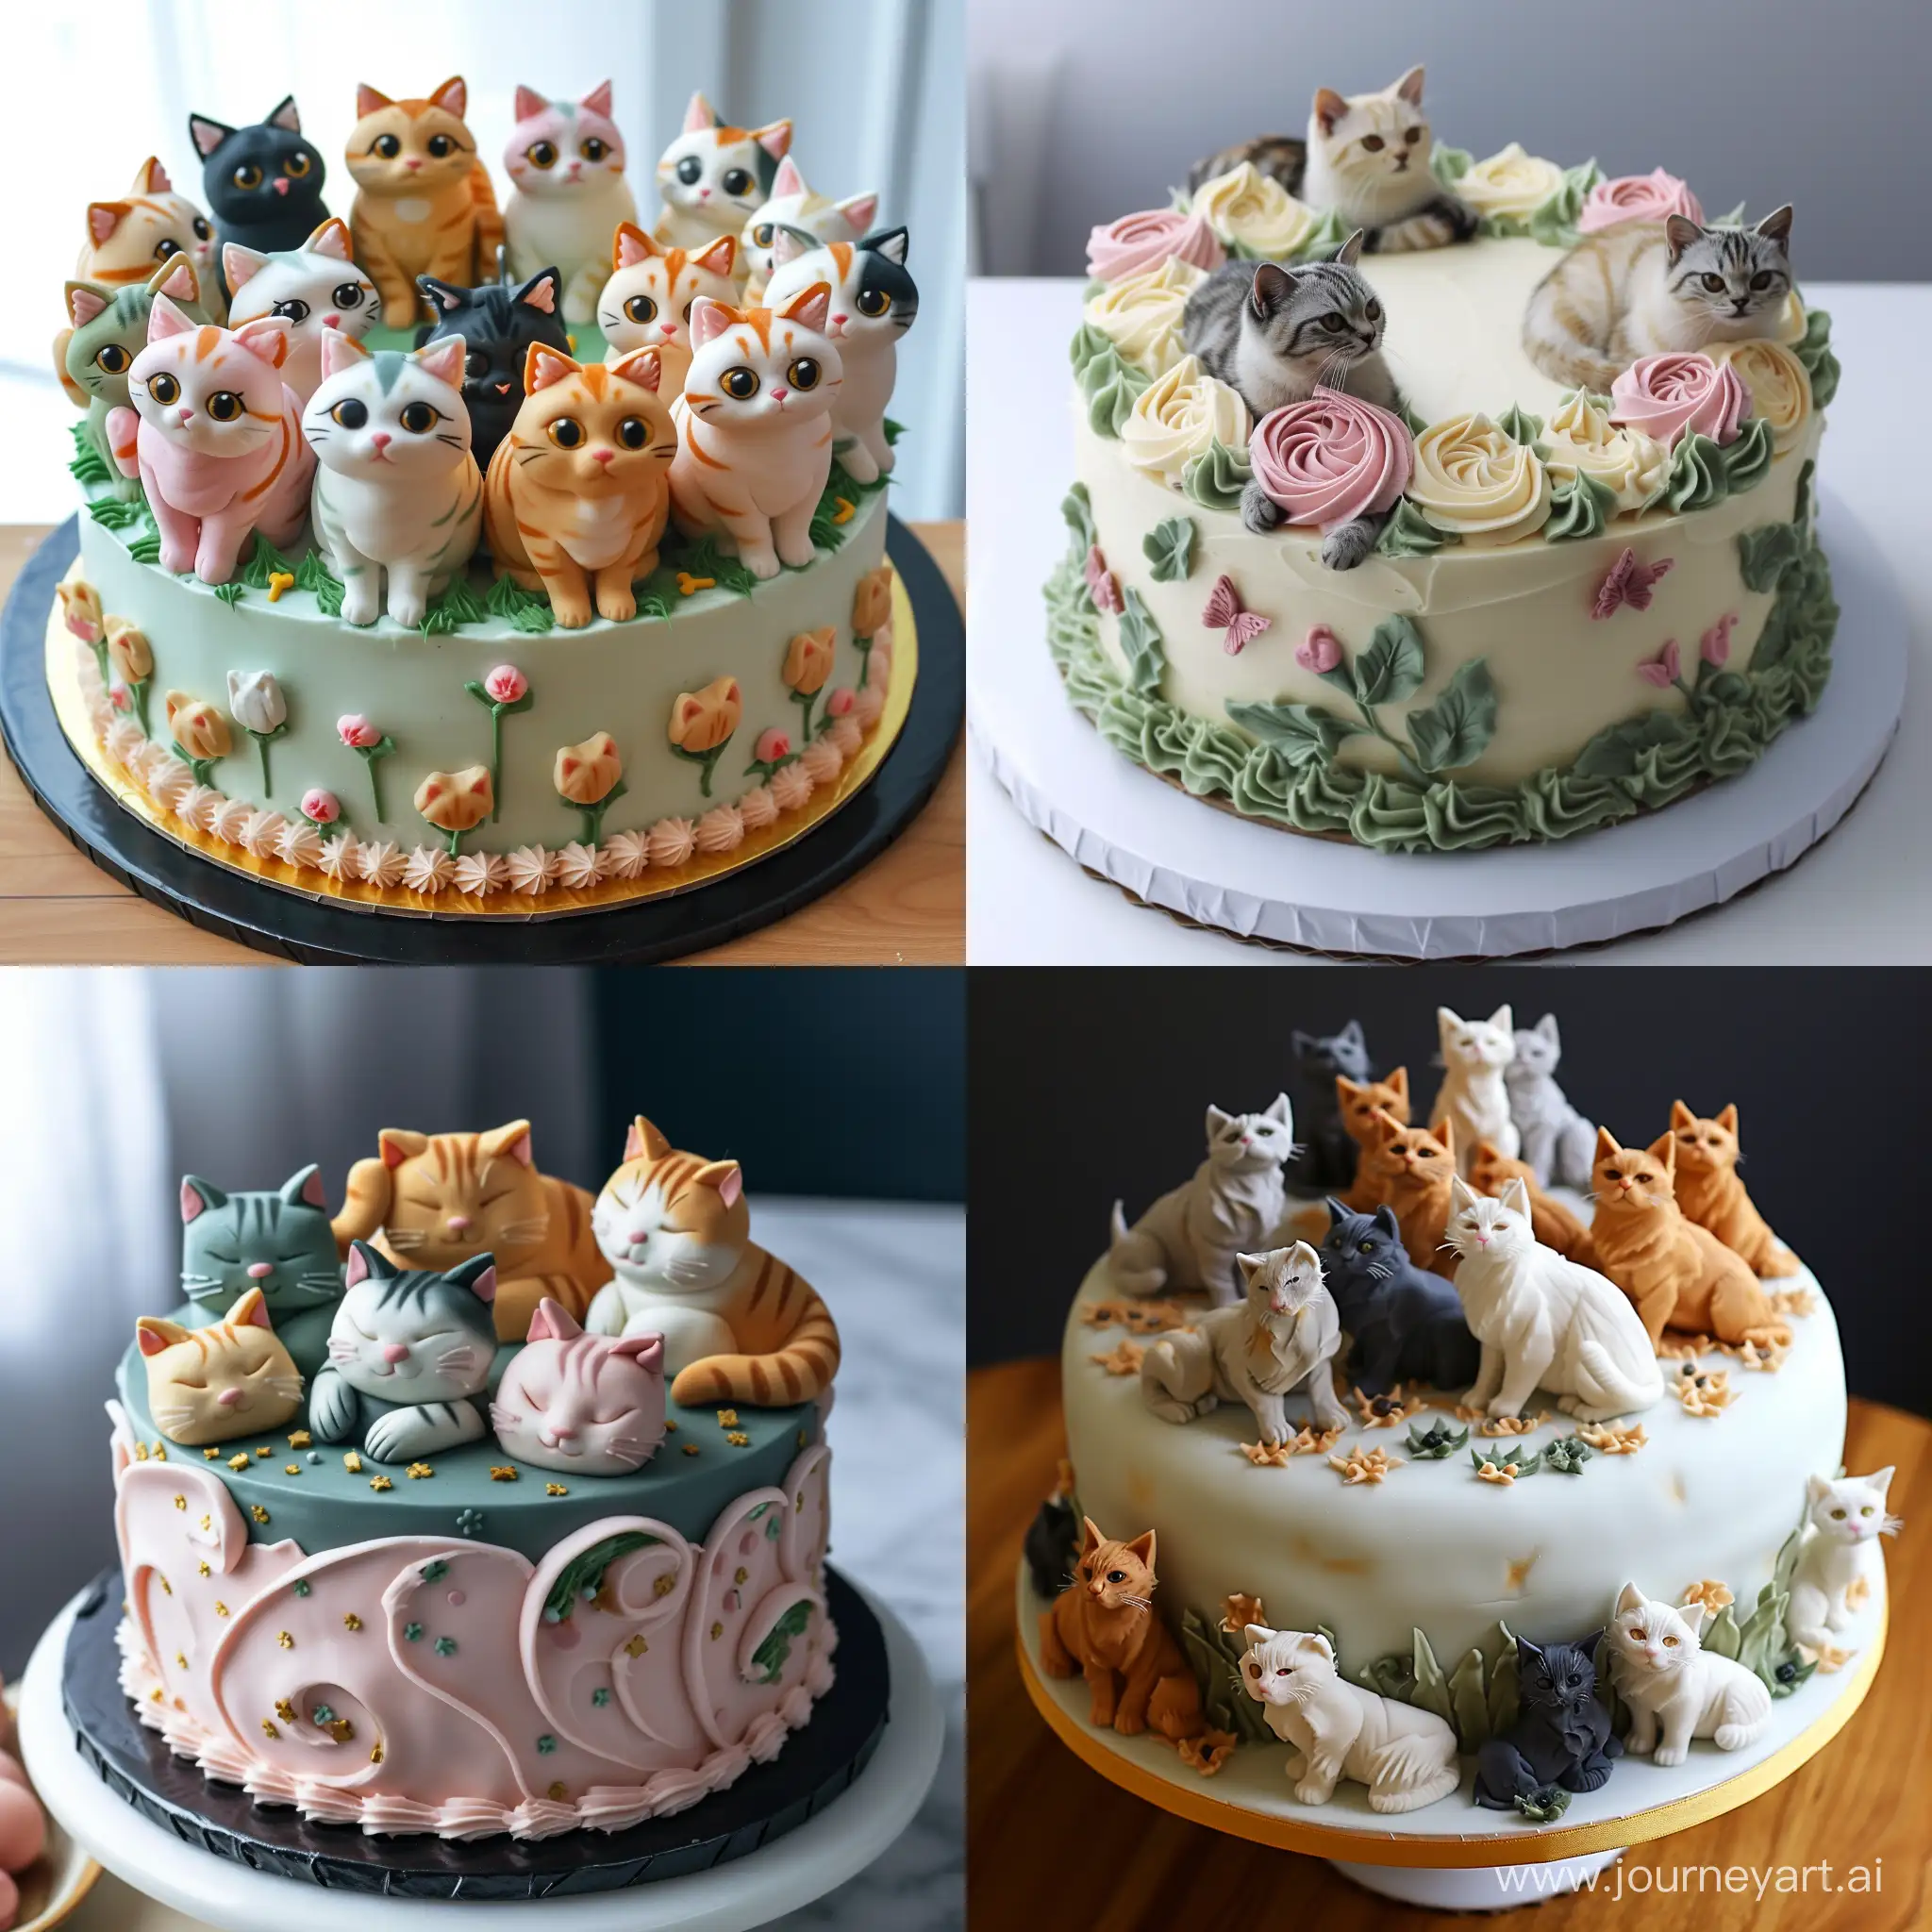 Adorable-Catthemed-Birthday-Cake-A-Sweet-Delight-for-Feline-Enthusiasts